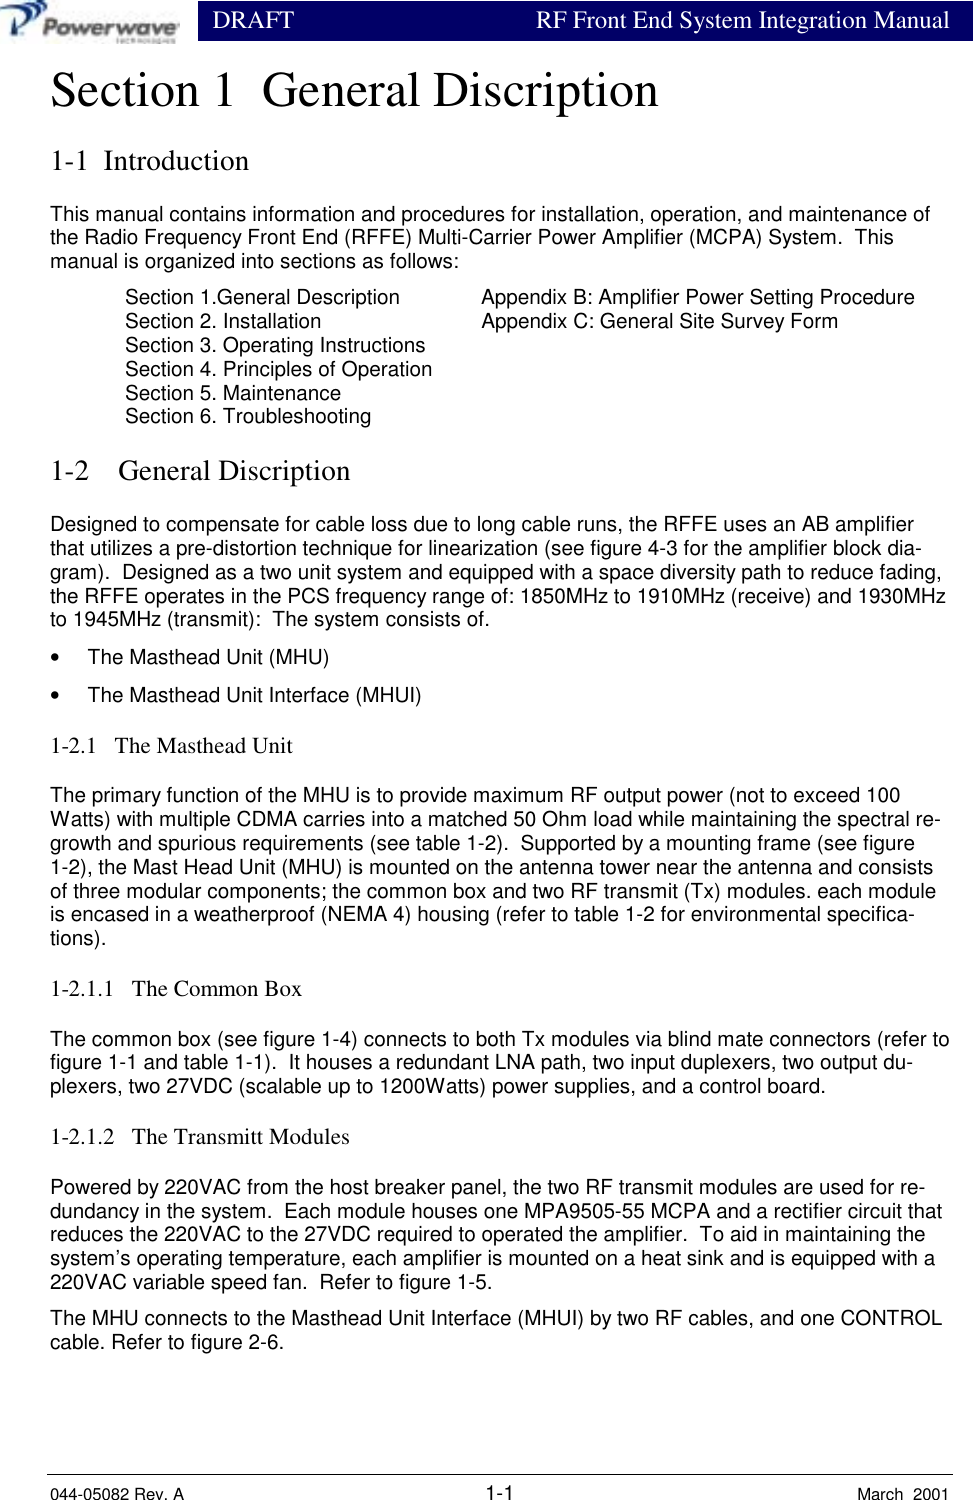                  DRAFT RF Front End System Integration Manual044-05082 Rev. A 1-1 March  2001Section 1  General Discription1-1  IntroductionThis manual contains information and procedures for installation, operation, and maintenance ofthe Radio Frequency Front End (RFFE) Multi-Carrier Power Amplifier (MCPA) System.  Thismanual is organized into sections as follows:Section 1.General Description Appendix B: Amplifier Power Setting ProcedureSection 2. Installation Appendix C: General Site Survey FormSection 3. Operating InstructionsSection 4. Principles of OperationSection 5. MaintenanceSection 6. Troubleshooting1-2    General DiscriptionDesigned to compensate for cable loss due to long cable runs, the RFFE uses an AB amplifierthat utilizes a pre-distortion technique for linearization (see figure 4-3 for the amplifier block dia-gram).  Designed as a two unit system and equipped with a space diversity path to reduce fading,the RFFE operates in the PCS frequency range of: 1850MHz to 1910MHz (receive) and 1930MHzto 1945MHz (transmit):  The system consists of.•  The Masthead Unit (MHU)•  The Masthead Unit Interface (MHUI)1-2.1   The Masthead UnitThe primary function of the MHU is to provide maximum RF output power (not to exceed 100Watts) with multiple CDMA carries into a matched 50 Ohm load while maintaining the spectral re-growth and spurious requirements (see table 1-2).  Supported by a mounting frame (see figure1-2), the Mast Head Unit (MHU) is mounted on the antenna tower near the antenna and consistsof three modular components; the common box and two RF transmit (Tx) modules. each moduleis encased in a weatherproof (NEMA 4) housing (refer to table 1-2 for environmental specifica-tions).1-2.1.1   The Common BoxThe common box (see figure 1-4) connects to both Tx modules via blind mate connectors (refer tofigure 1-1 and table 1-1).  It houses a redundant LNA path, two input duplexers, two output du-plexers, two 27VDC (scalable up to 1200Watts) power supplies, and a control board.1-2.1.2   The Transmitt ModulesPowered by 220VAC from the host breaker panel, the two RF transmit modules are used for re-dundancy in the system.  Each module houses one MPA9505-55 MCPA and a rectifier circuit thatreduces the 220VAC to the 27VDC required to operated the amplifier.  To aid in maintaining thesystem’s operating temperature, each amplifier is mounted on a heat sink and is equipped with a220VAC variable speed fan.  Refer to figure 1-5.The MHU connects to the Masthead Unit Interface (MHUI) by two RF cables, and one CONTROLcable. Refer to figure 2-6.